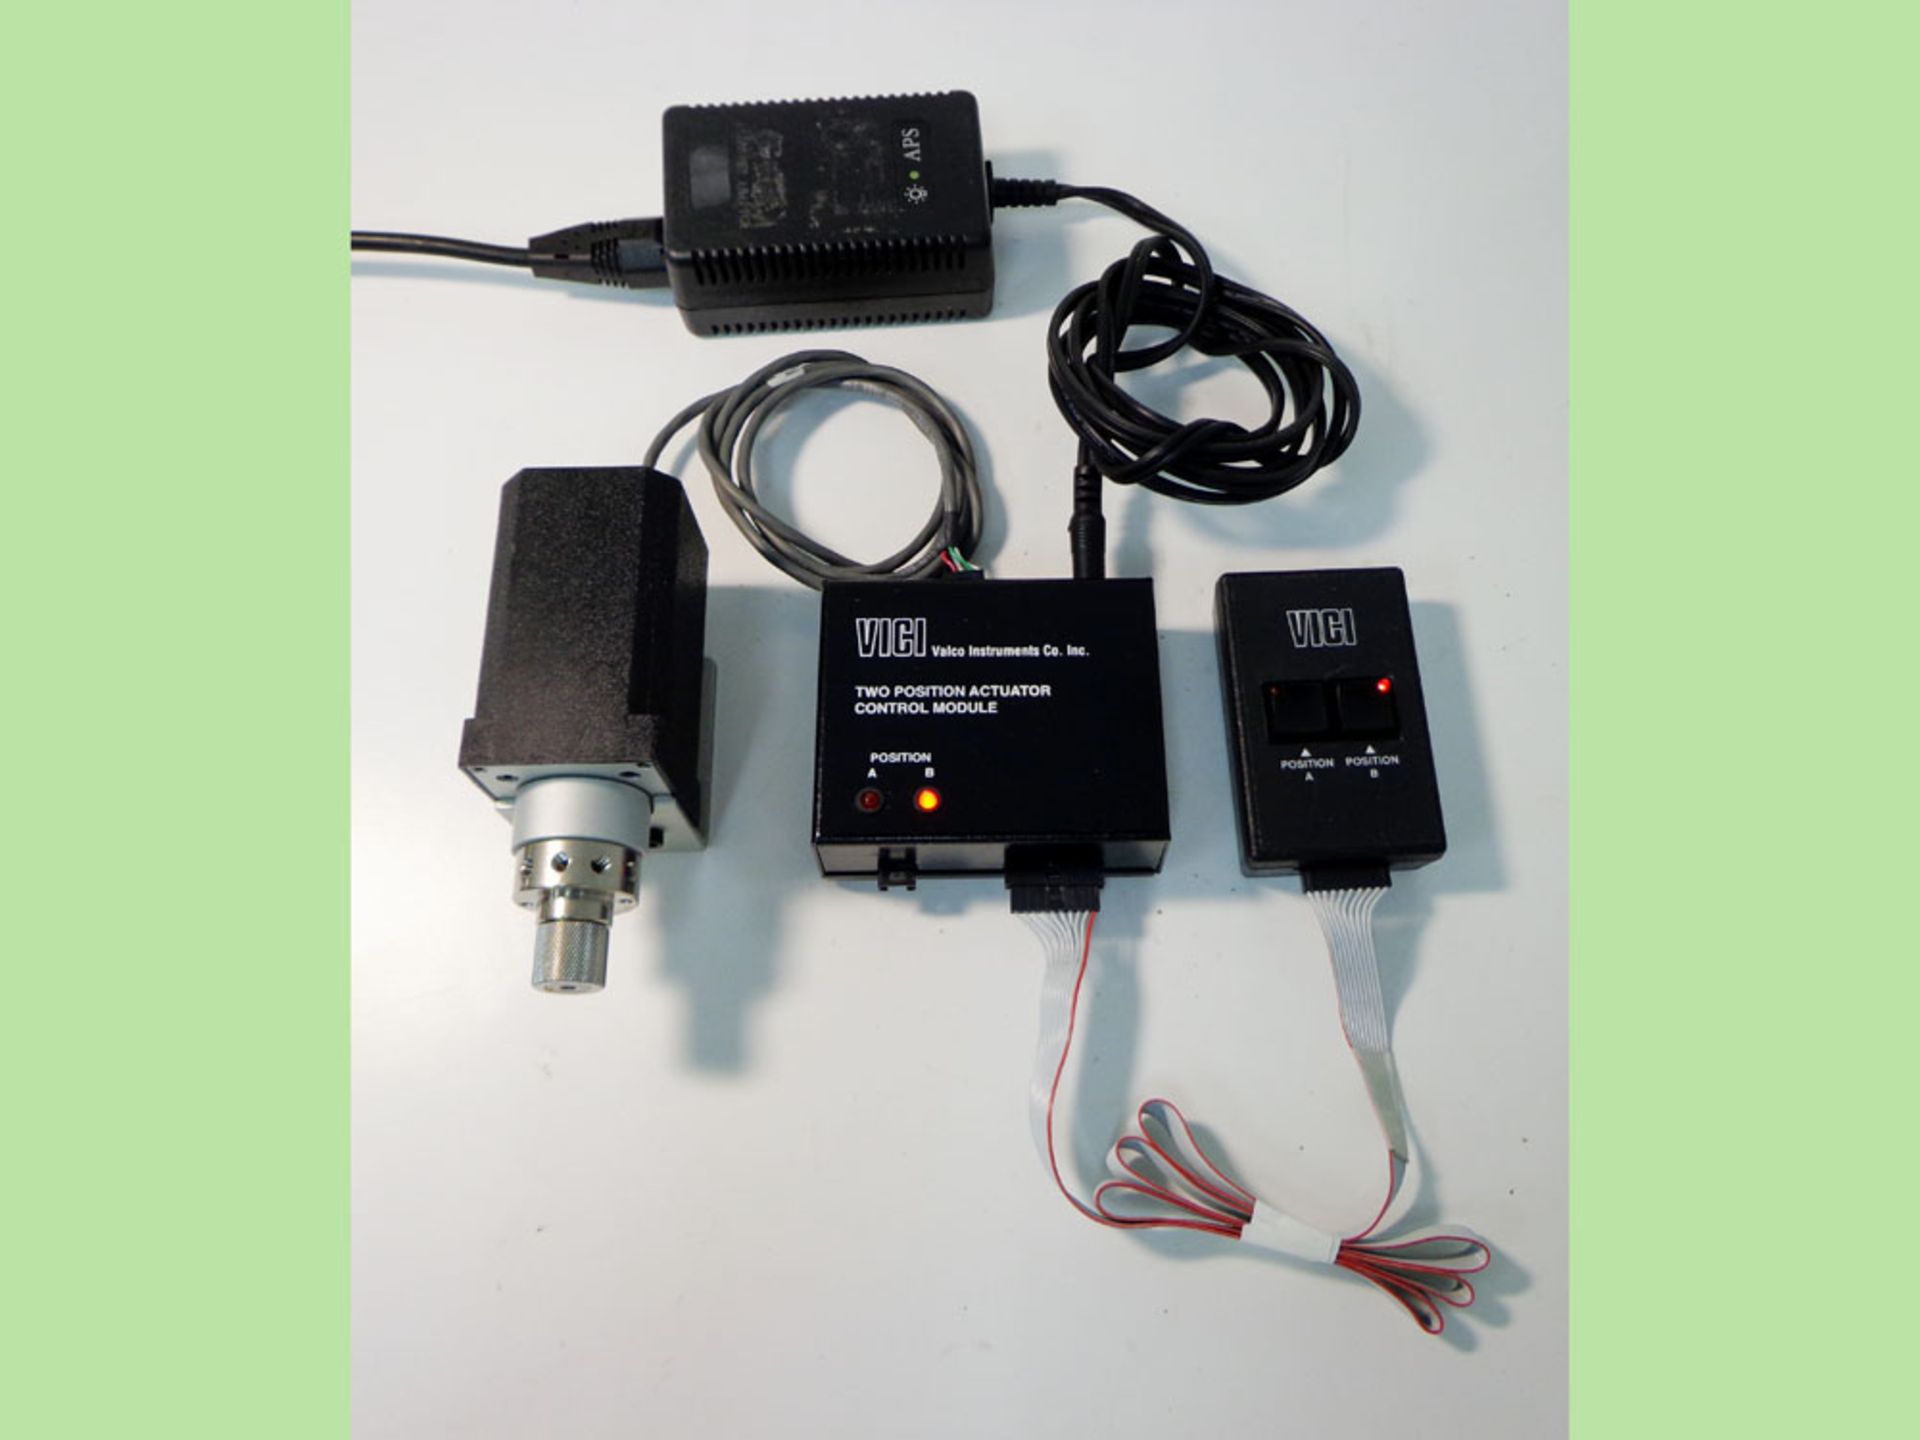 Vici Valco Instruments Modular Universal Valve/Actuator, Model EHMA, with Two Position Actuator